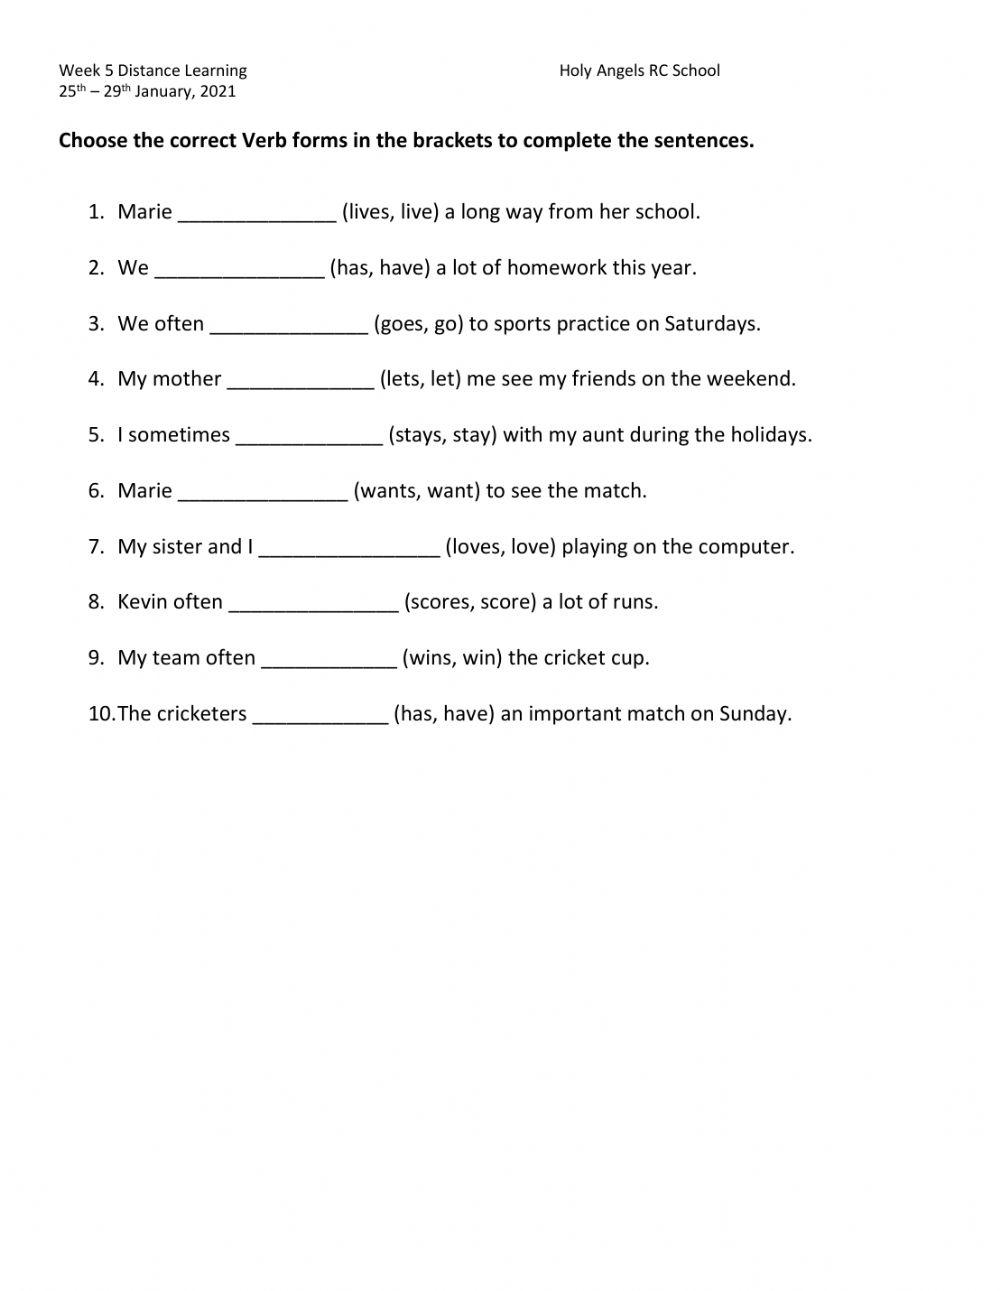 Subject Verb agreement